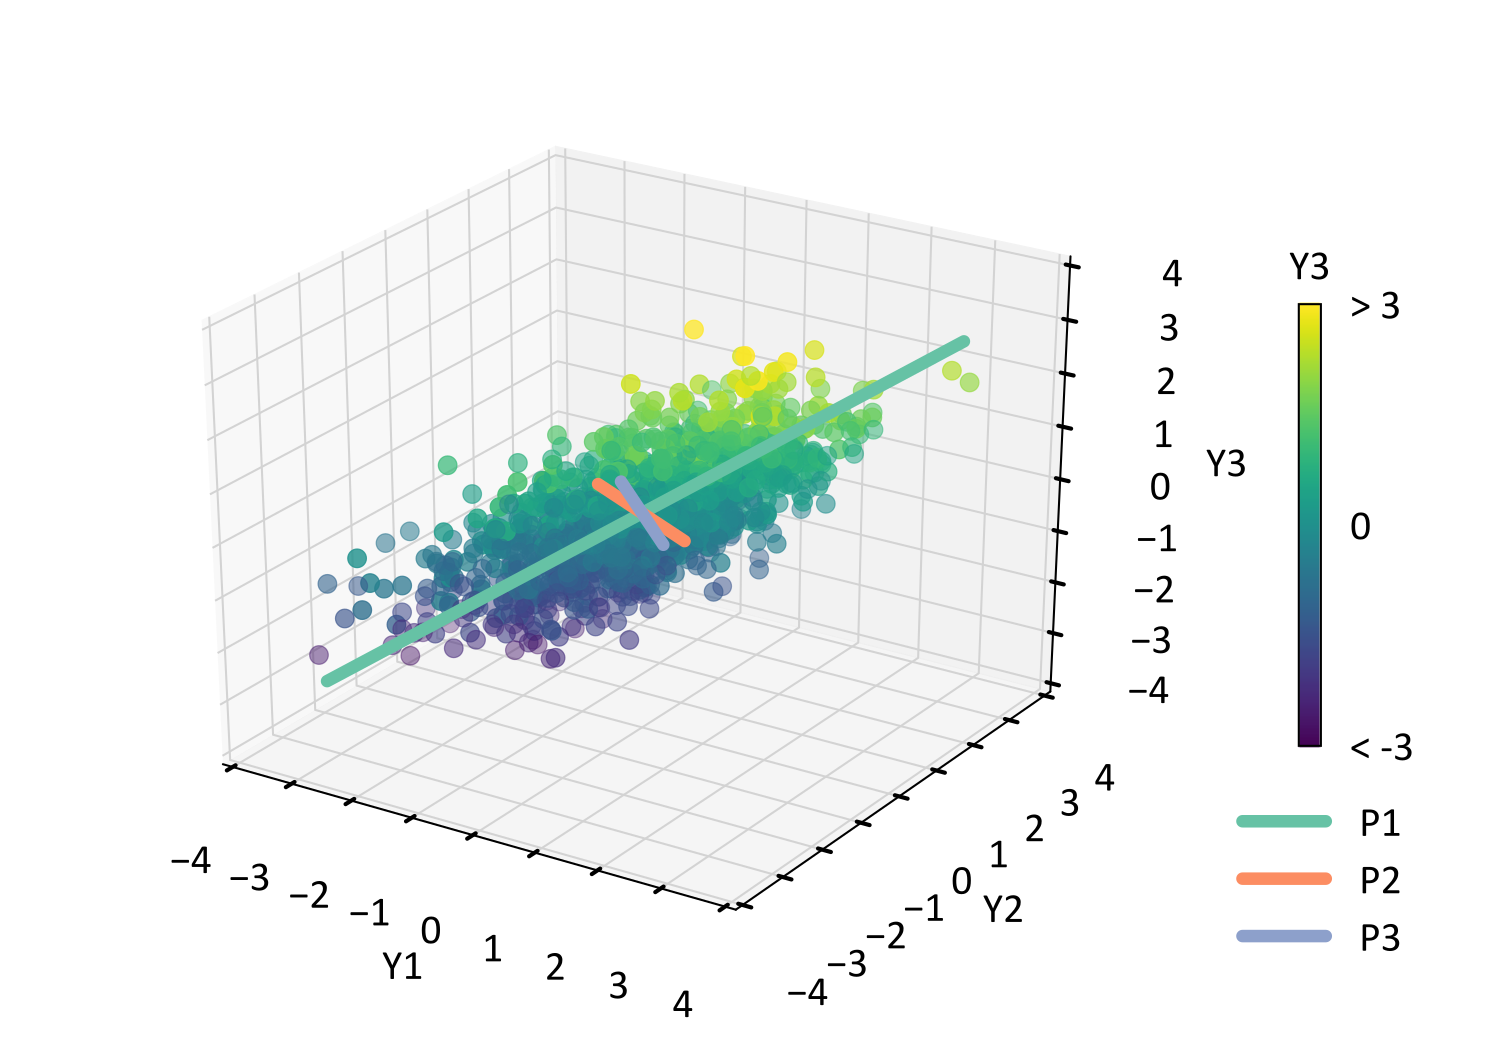 Scatter plot of the original data with the orientation (eigenvector) and magnitude (eigenvalue) of the principal components overlain.